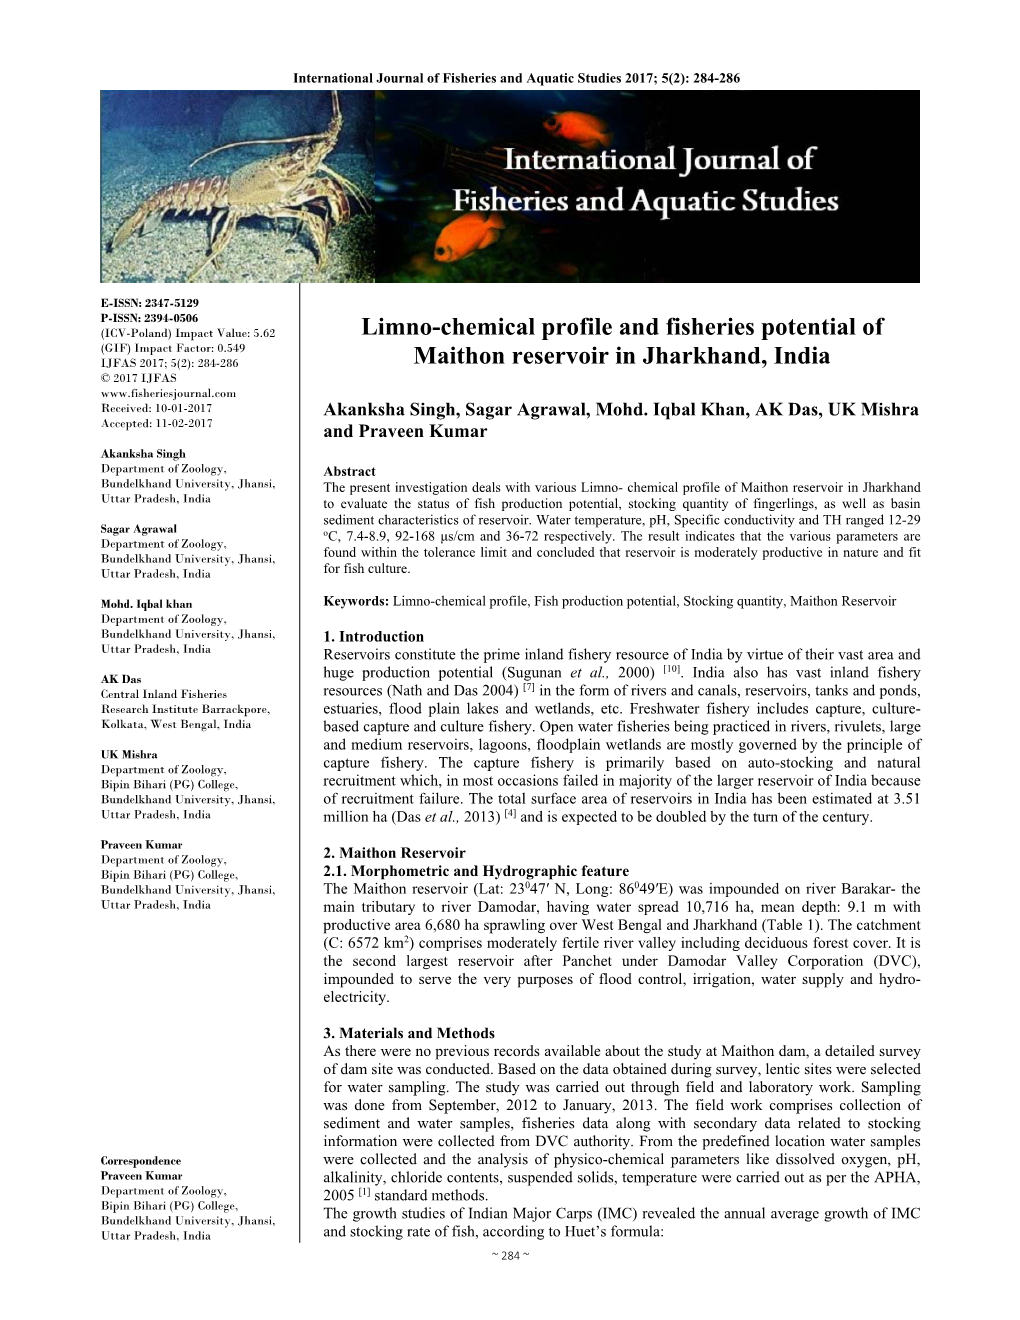 Limno-Chemical Profile and Fisheries Potential of Maithon Reservoir In